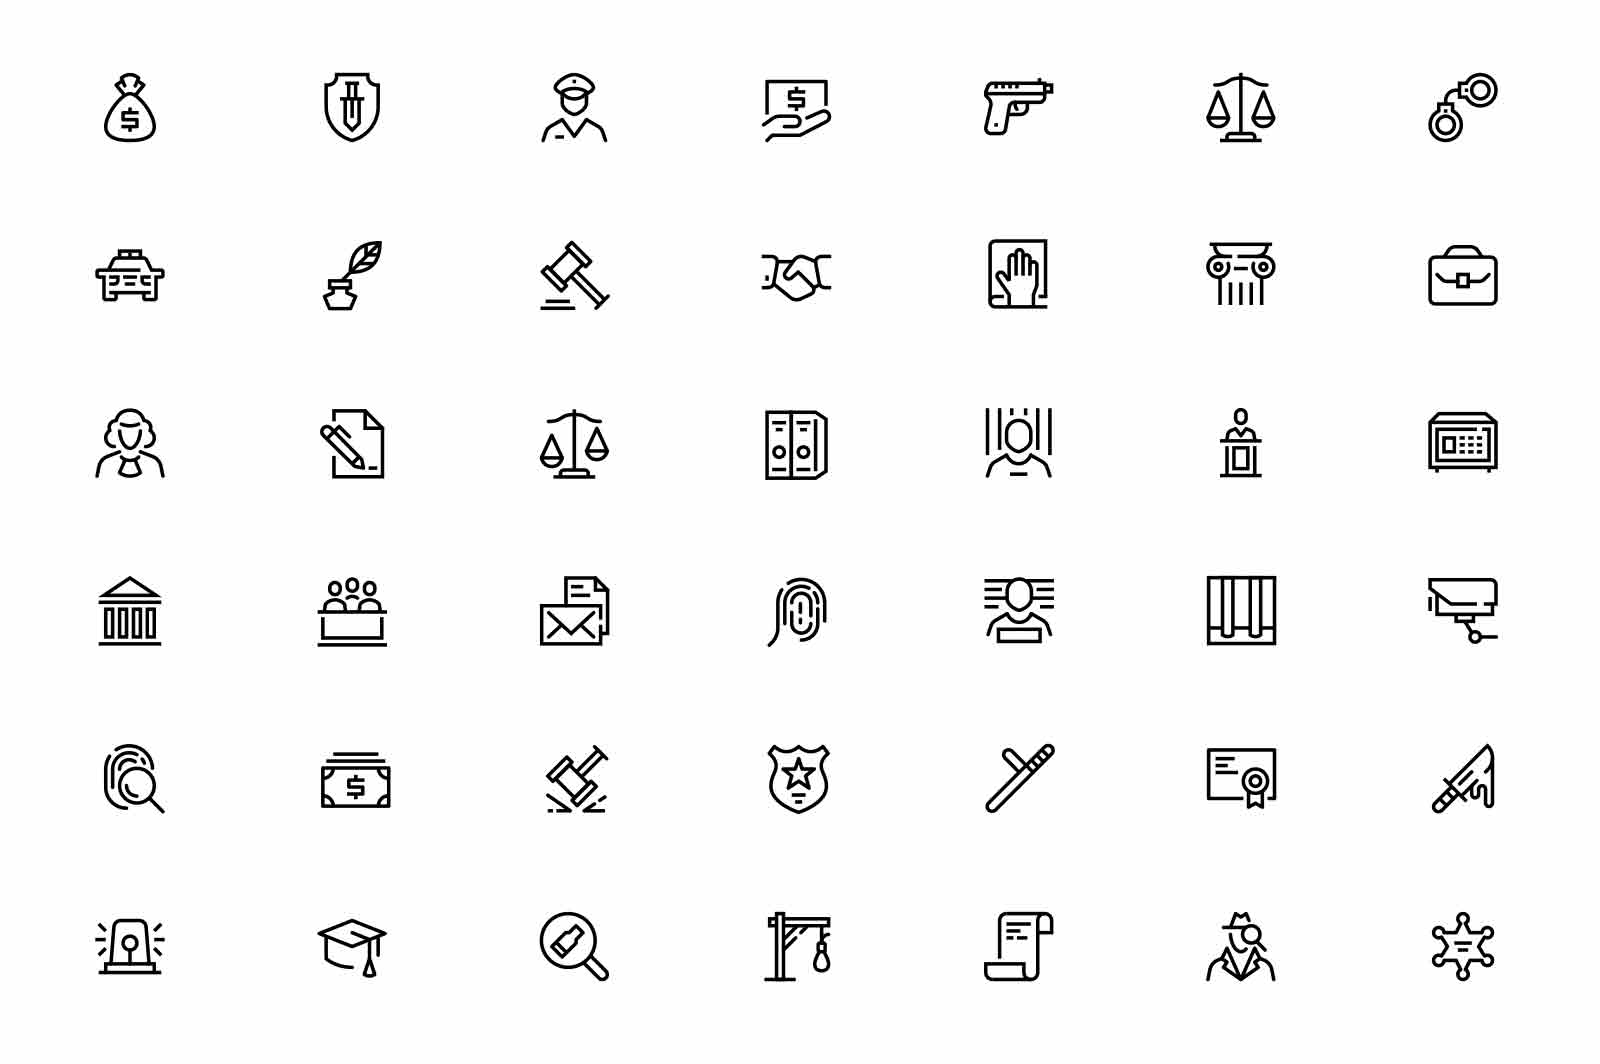 Law and justice related symbols icons set vector illustration. Hammer, legal scales, lawyer, courthouse line icon. Court of justice concept